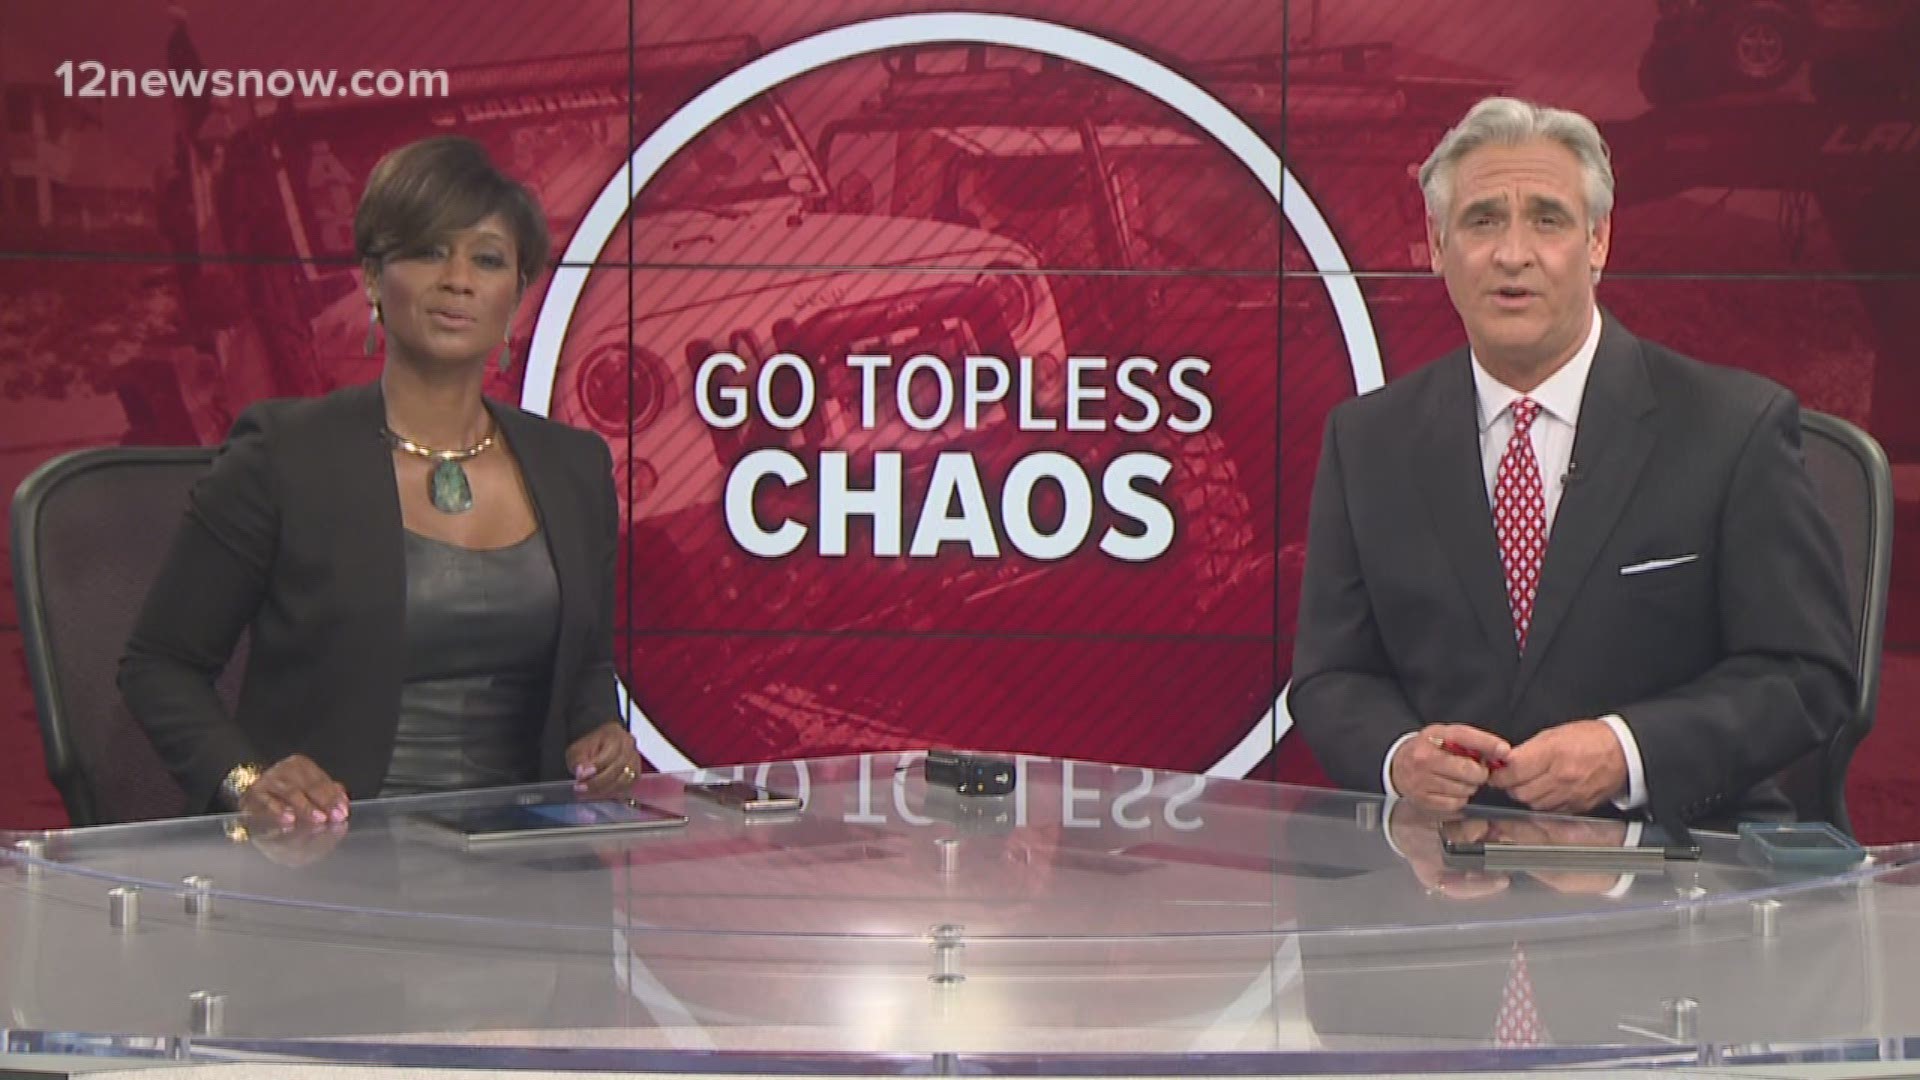 A petition to end 'Go Topless Weekend' has garnered over 18,000 online signatures.